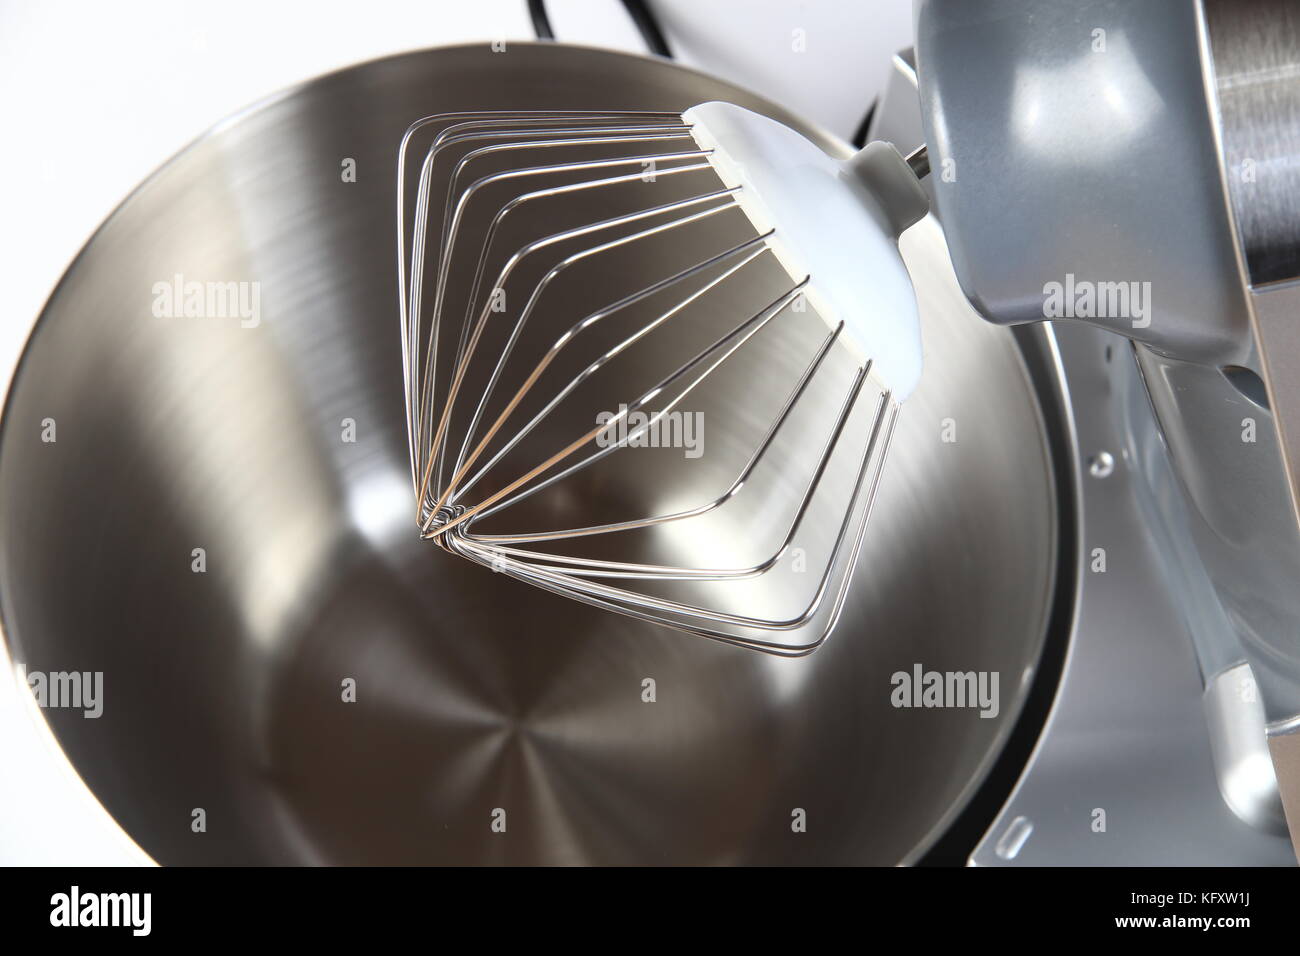 Steel whisk of new food processor close-up. Whisk on steel bowl background. Stock Photo